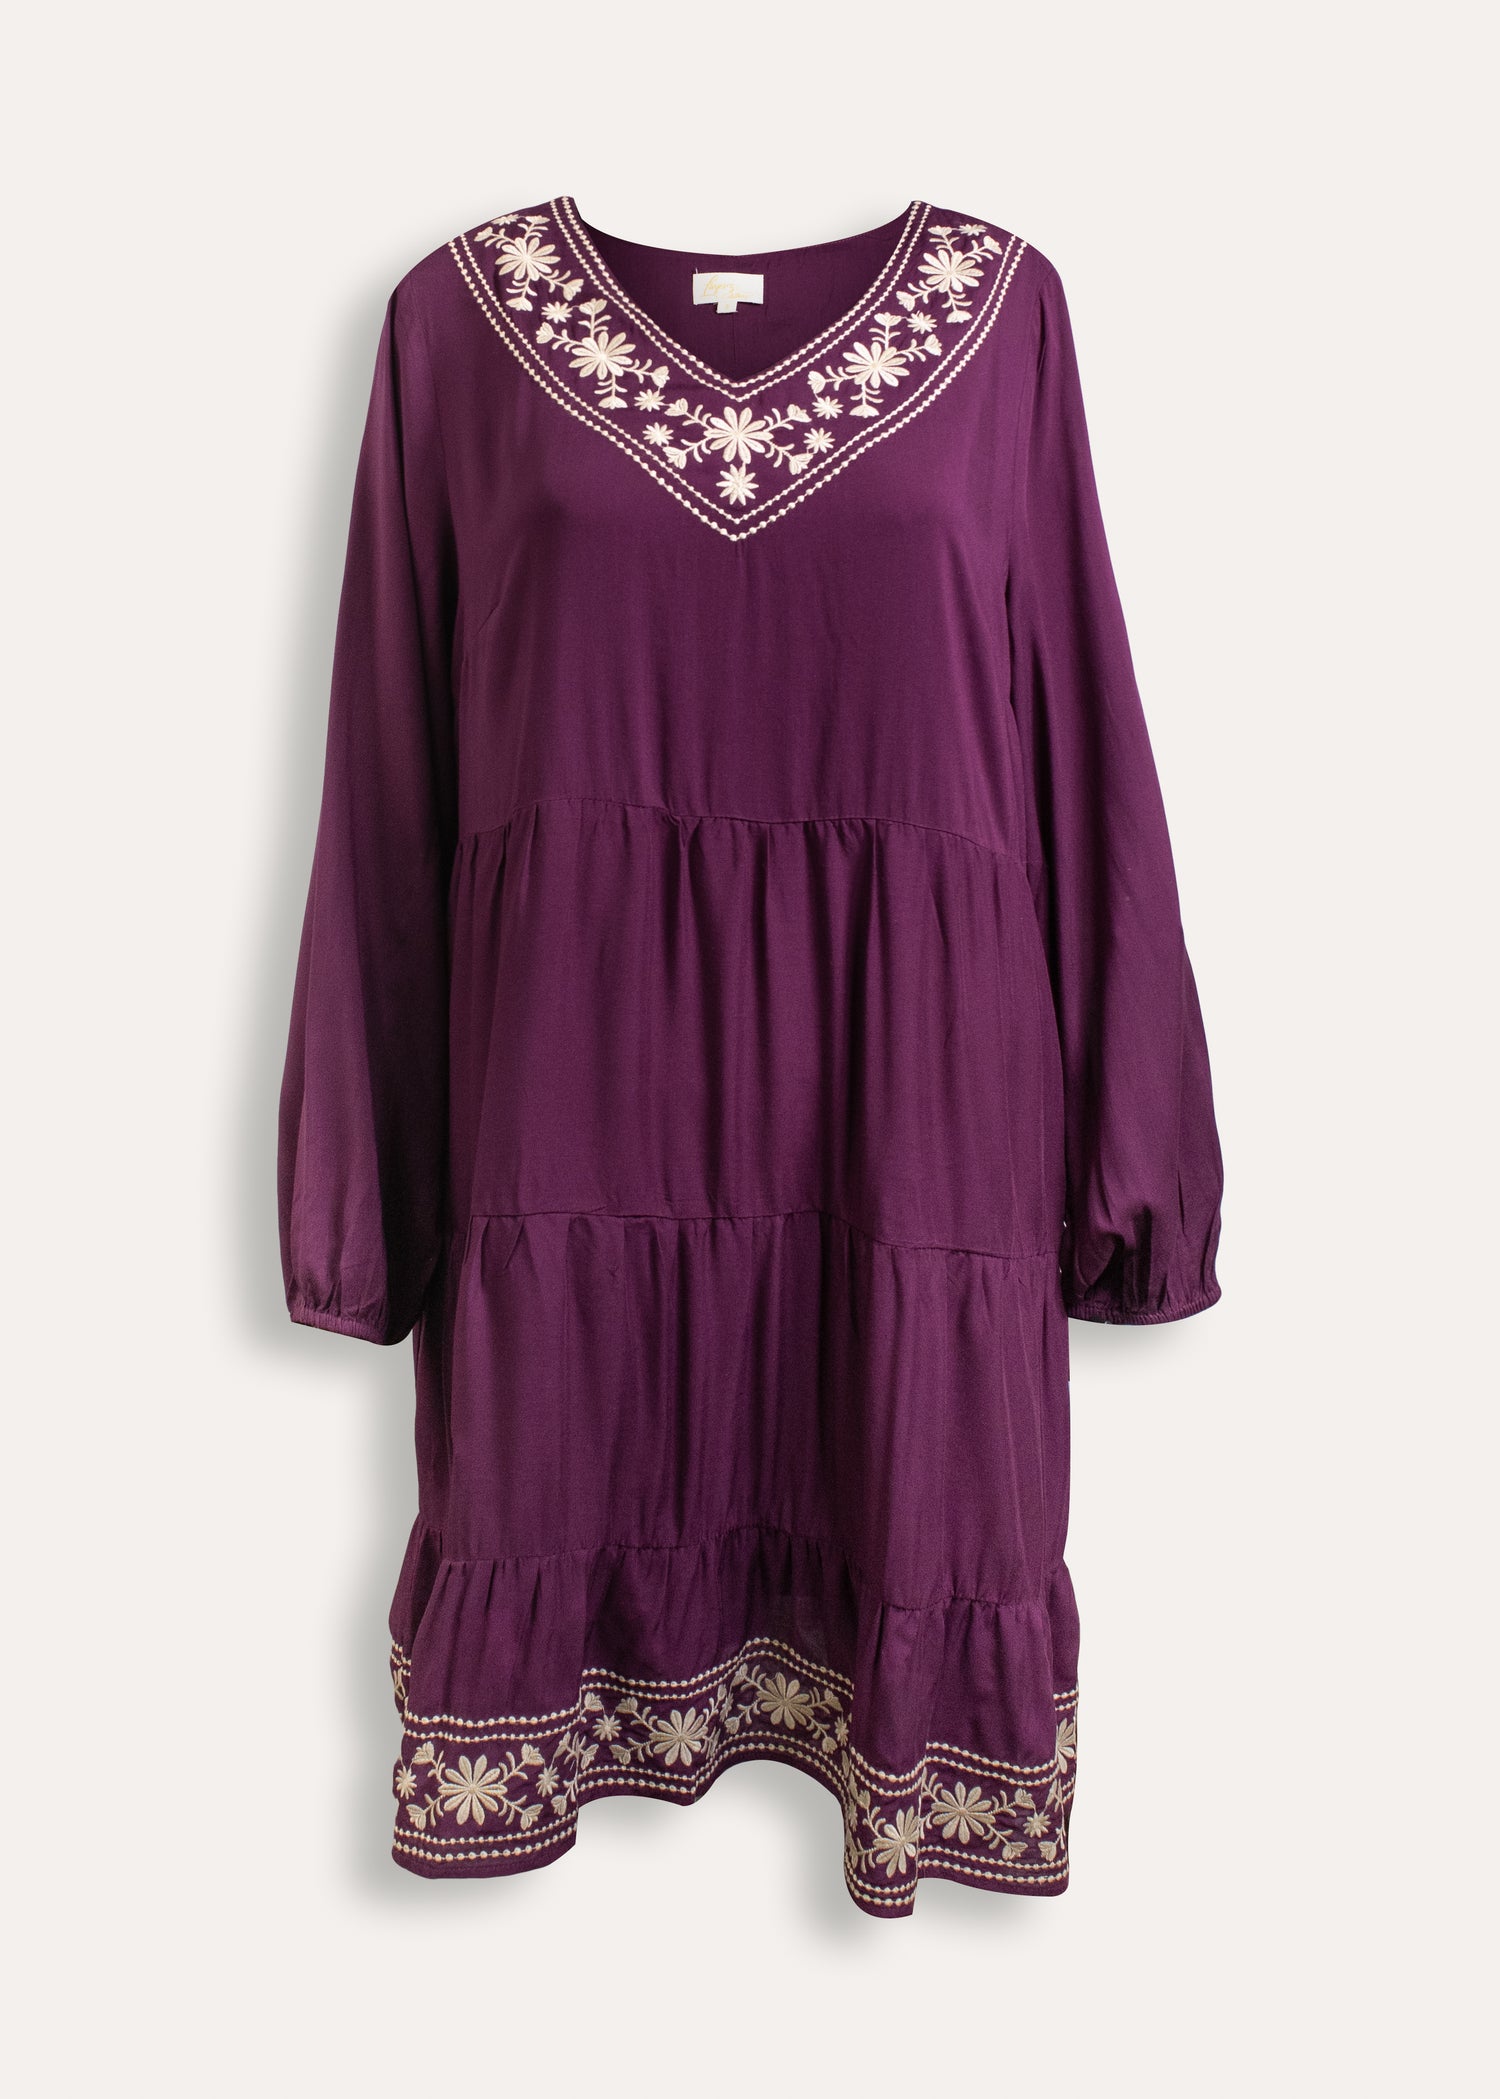 Maroon Dress with Cream Embroidery